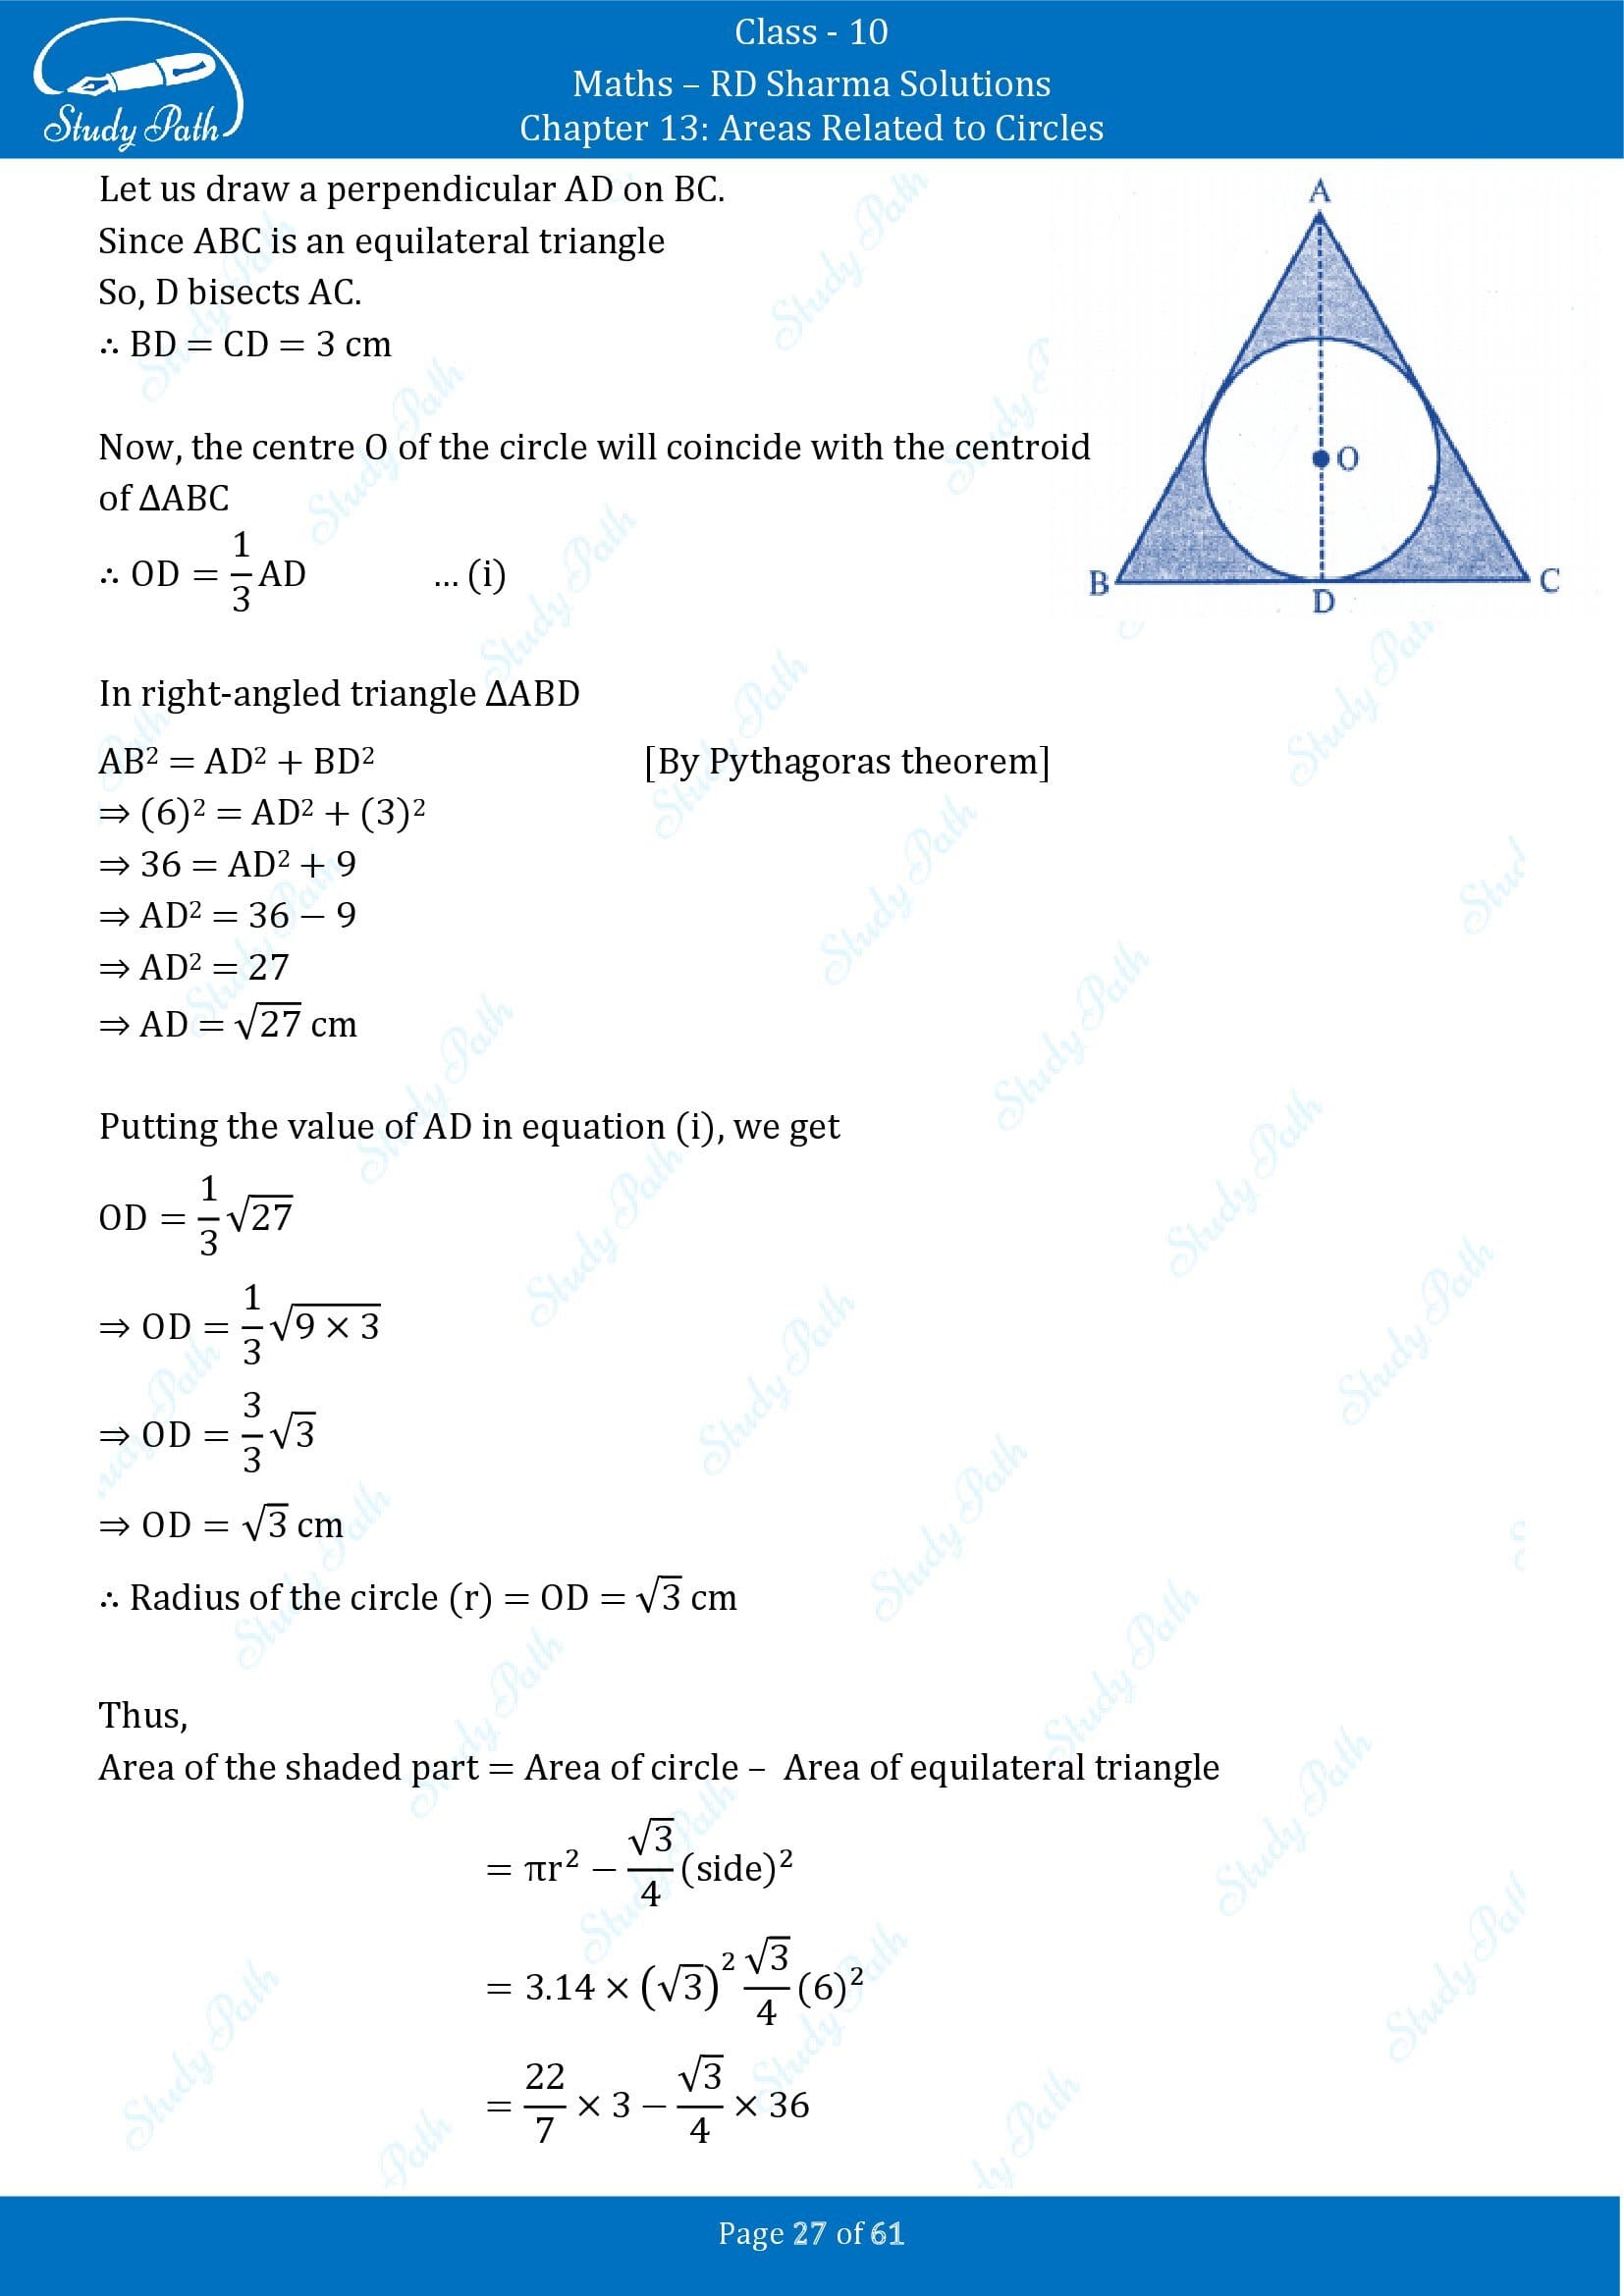 RD Sharma Solutions Class 10 Chapter 13 Areas Related to Circles Exercise 13.4 00027